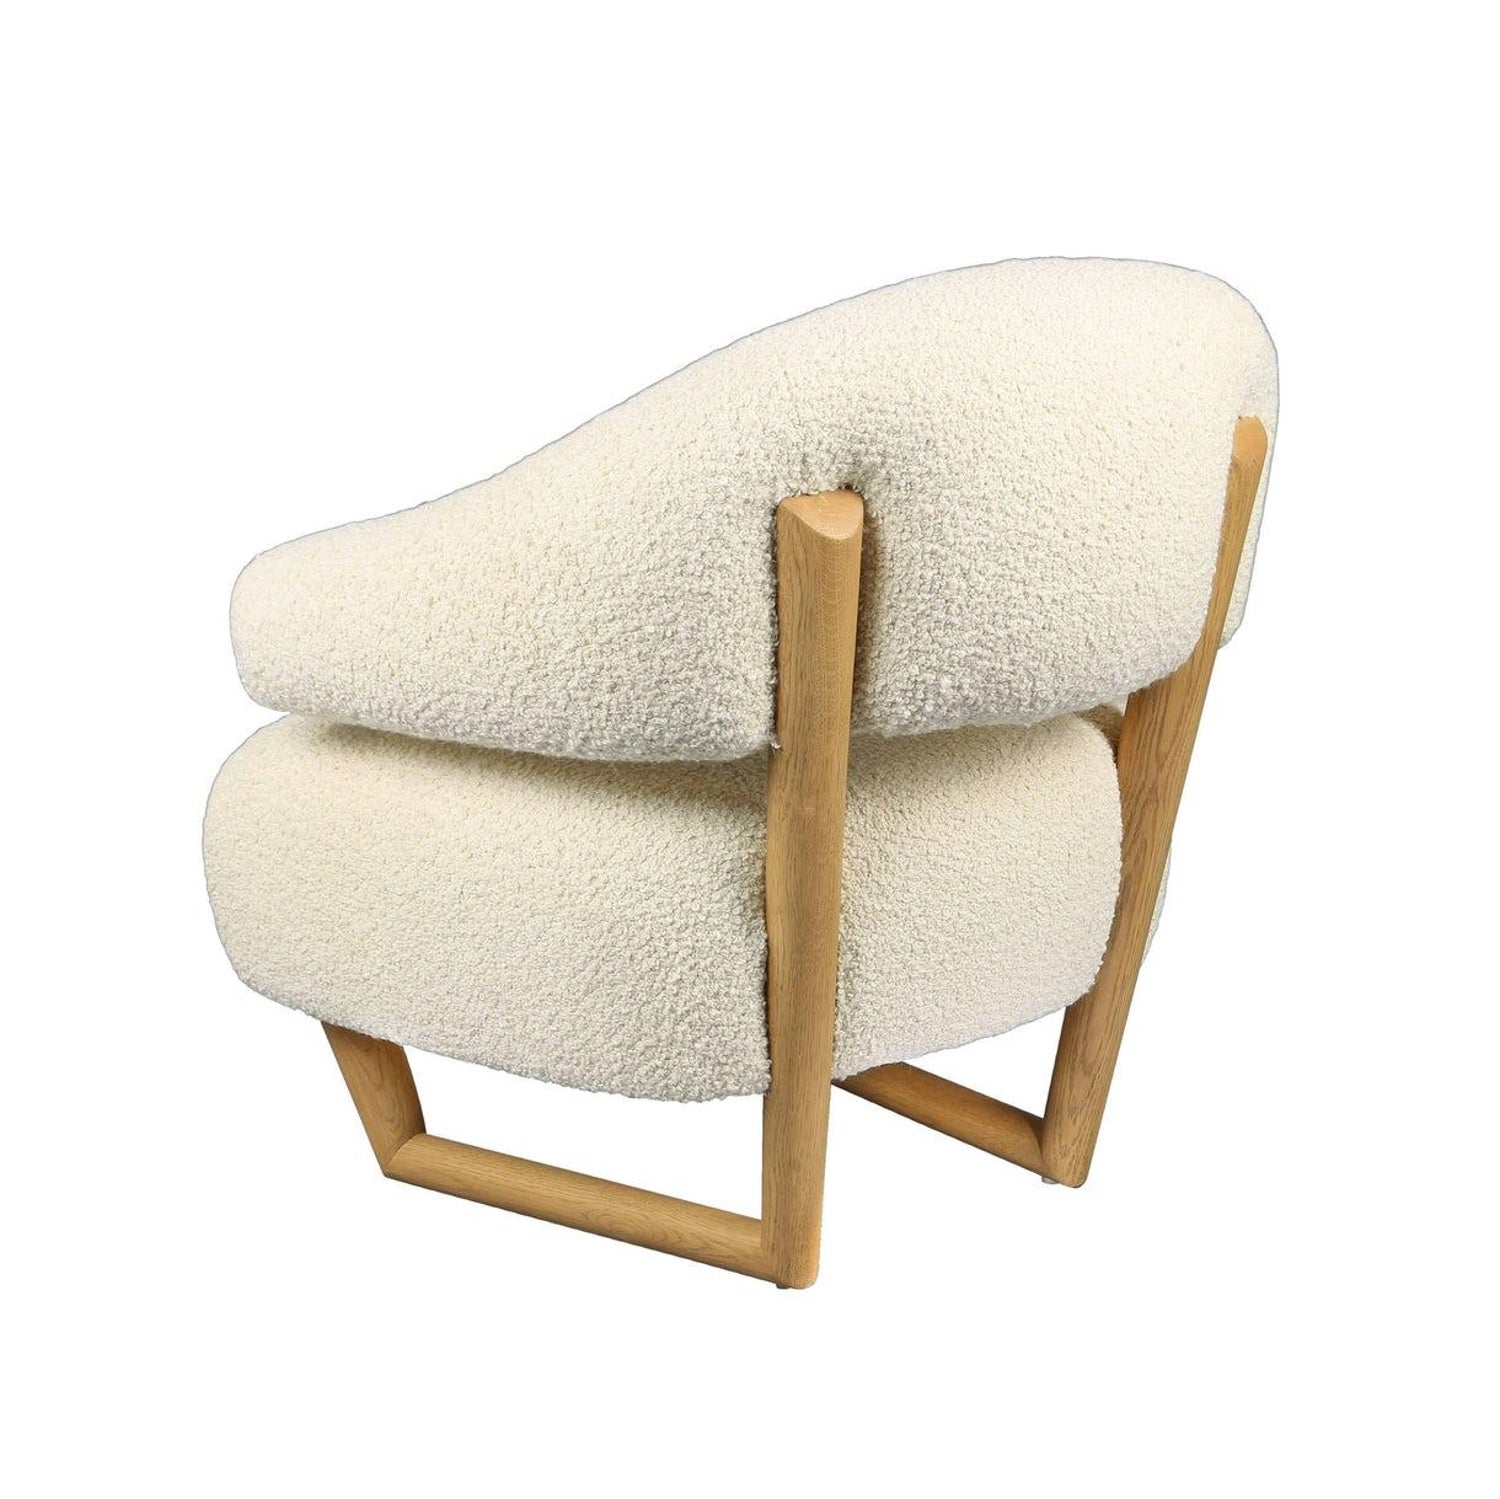 Sculpture' Armchair in the Style of Jean Royère 'r' For Sale at 1stDibs | jean  royere chair, jean royere armchair, royere chairs